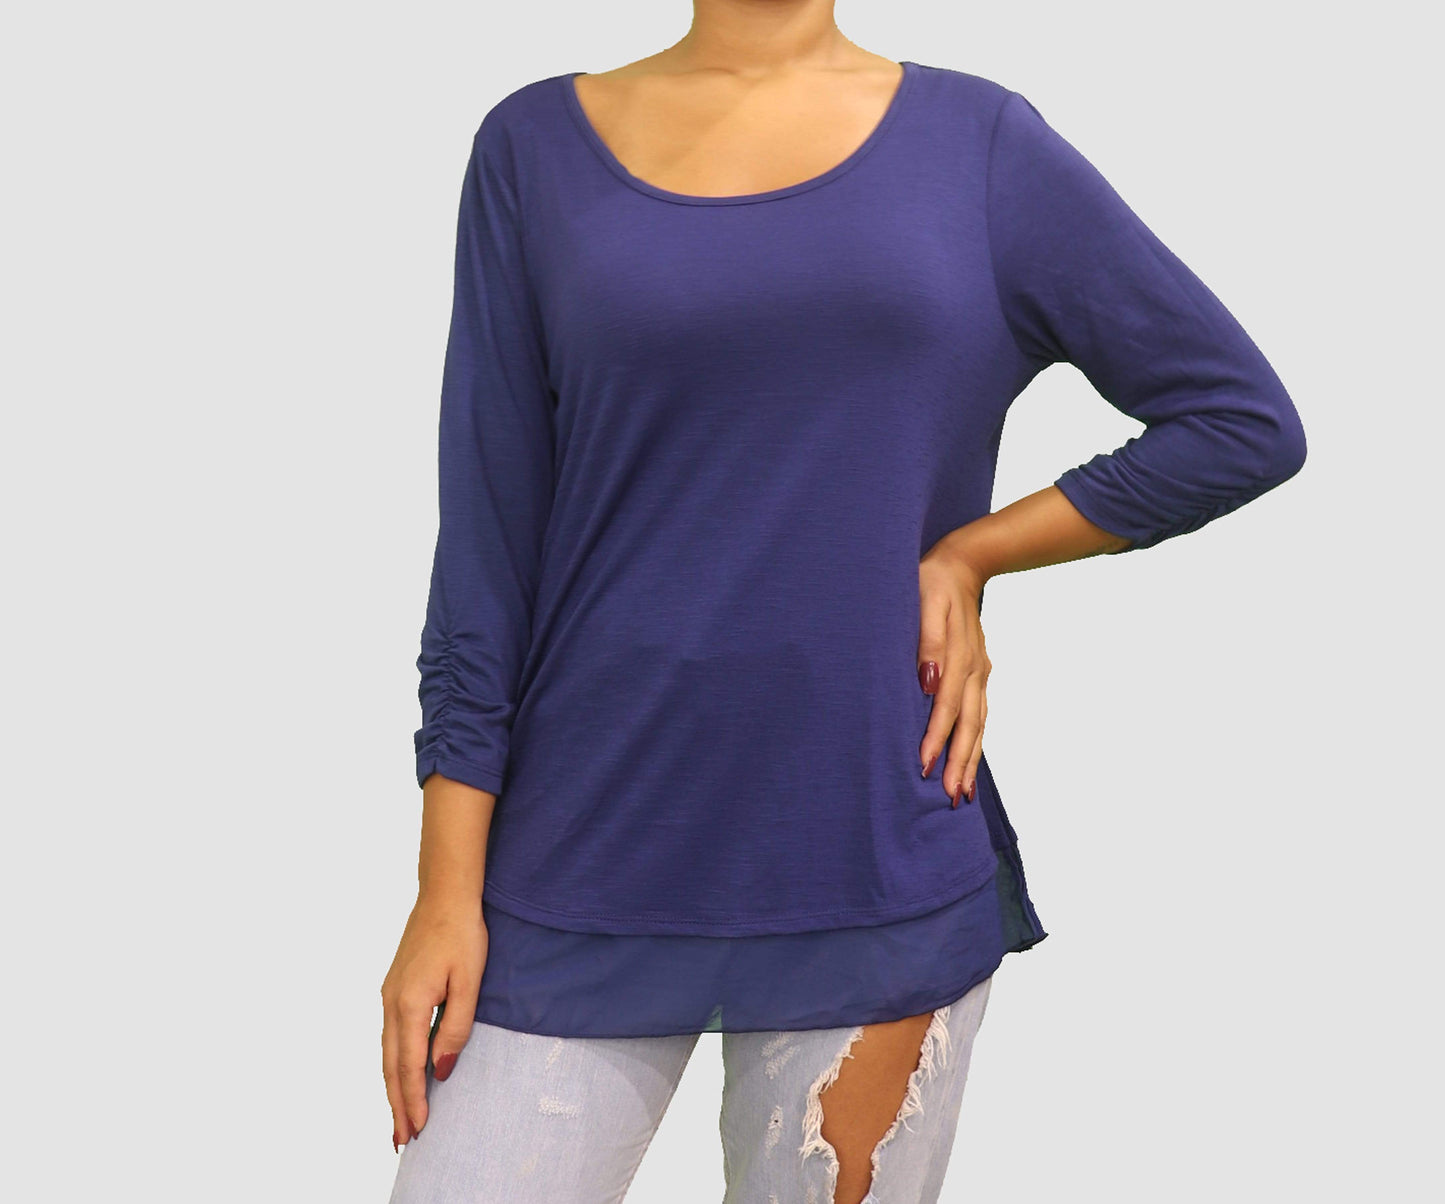 Style & Co Womens Tops Long Sleeve Top